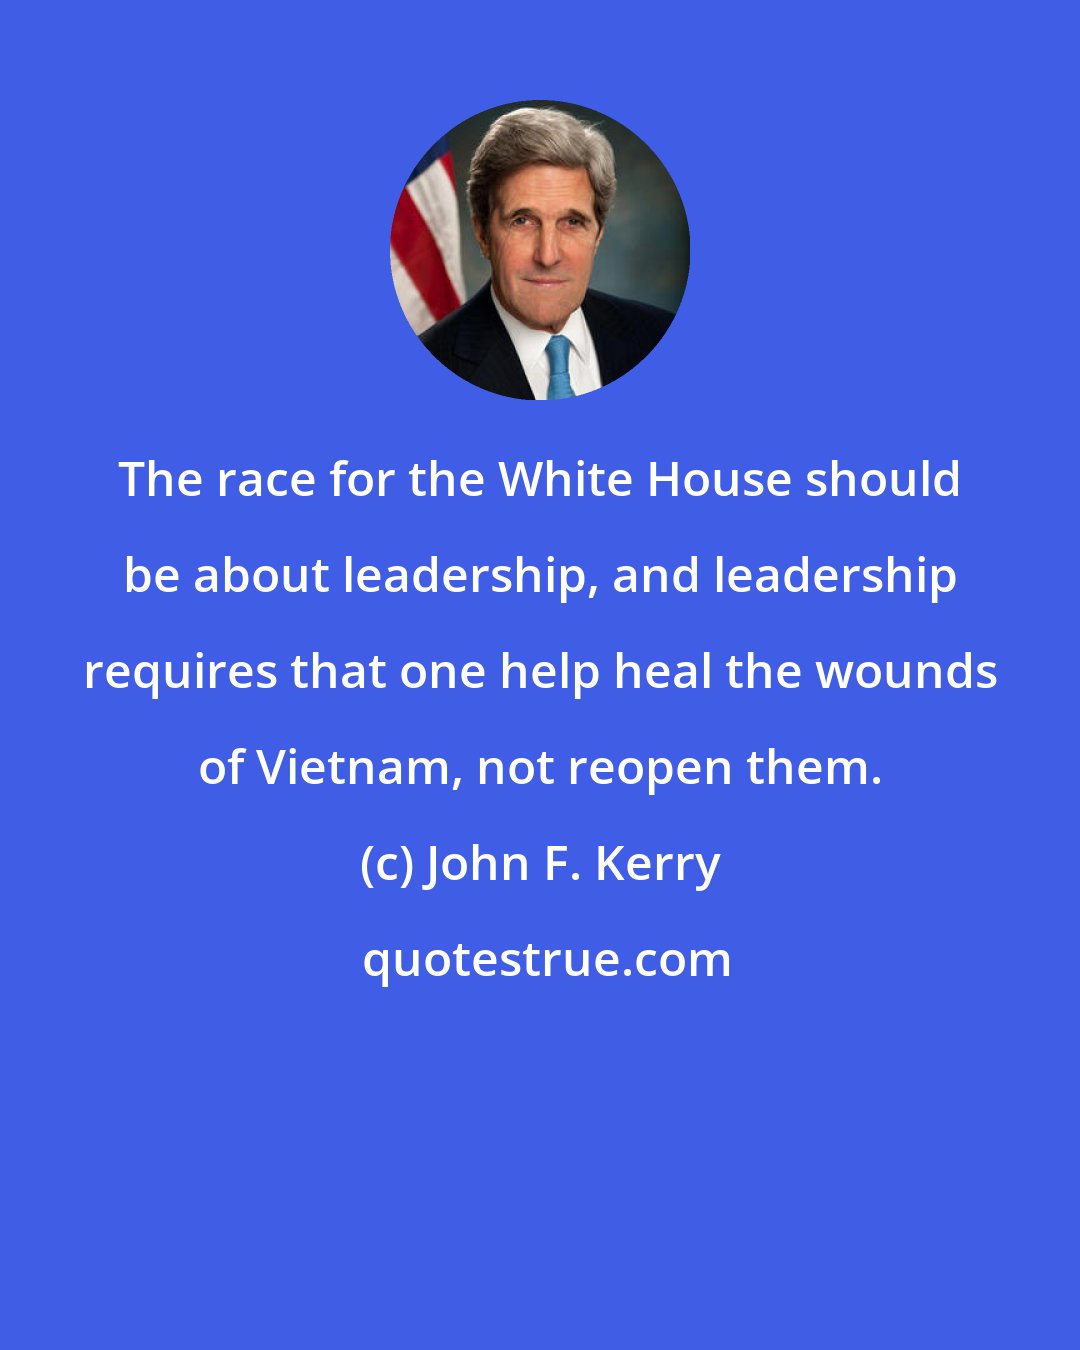 John F. Kerry: The race for the White House should be about leadership, and leadership requires that one help heal the wounds of Vietnam, not reopen them.